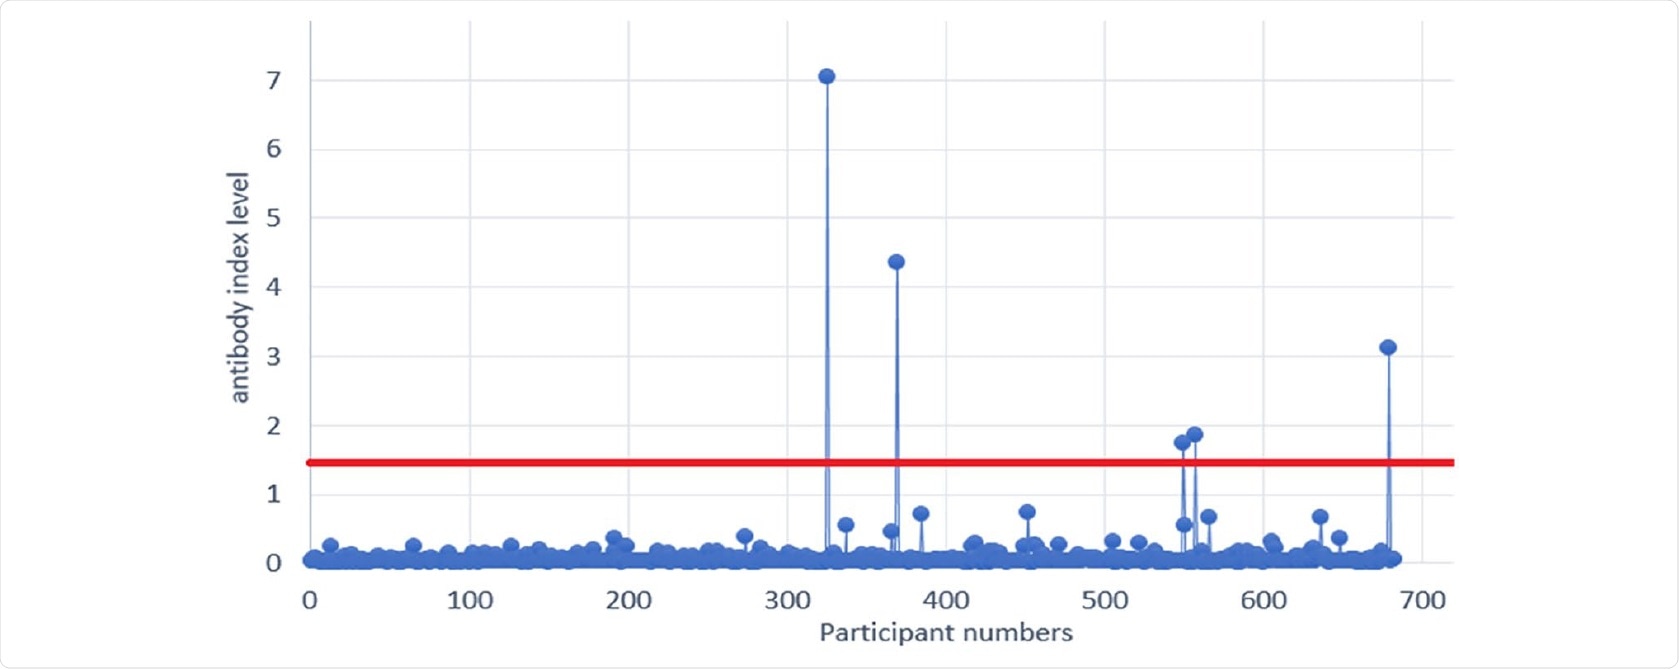 SARS-CoV-2 antibody levels among first responders (vertical axis - participant numbers. Horizontal axis - SARS-CoV-2 antibody level measured in index. Positive threshold is 1.4 index and above).